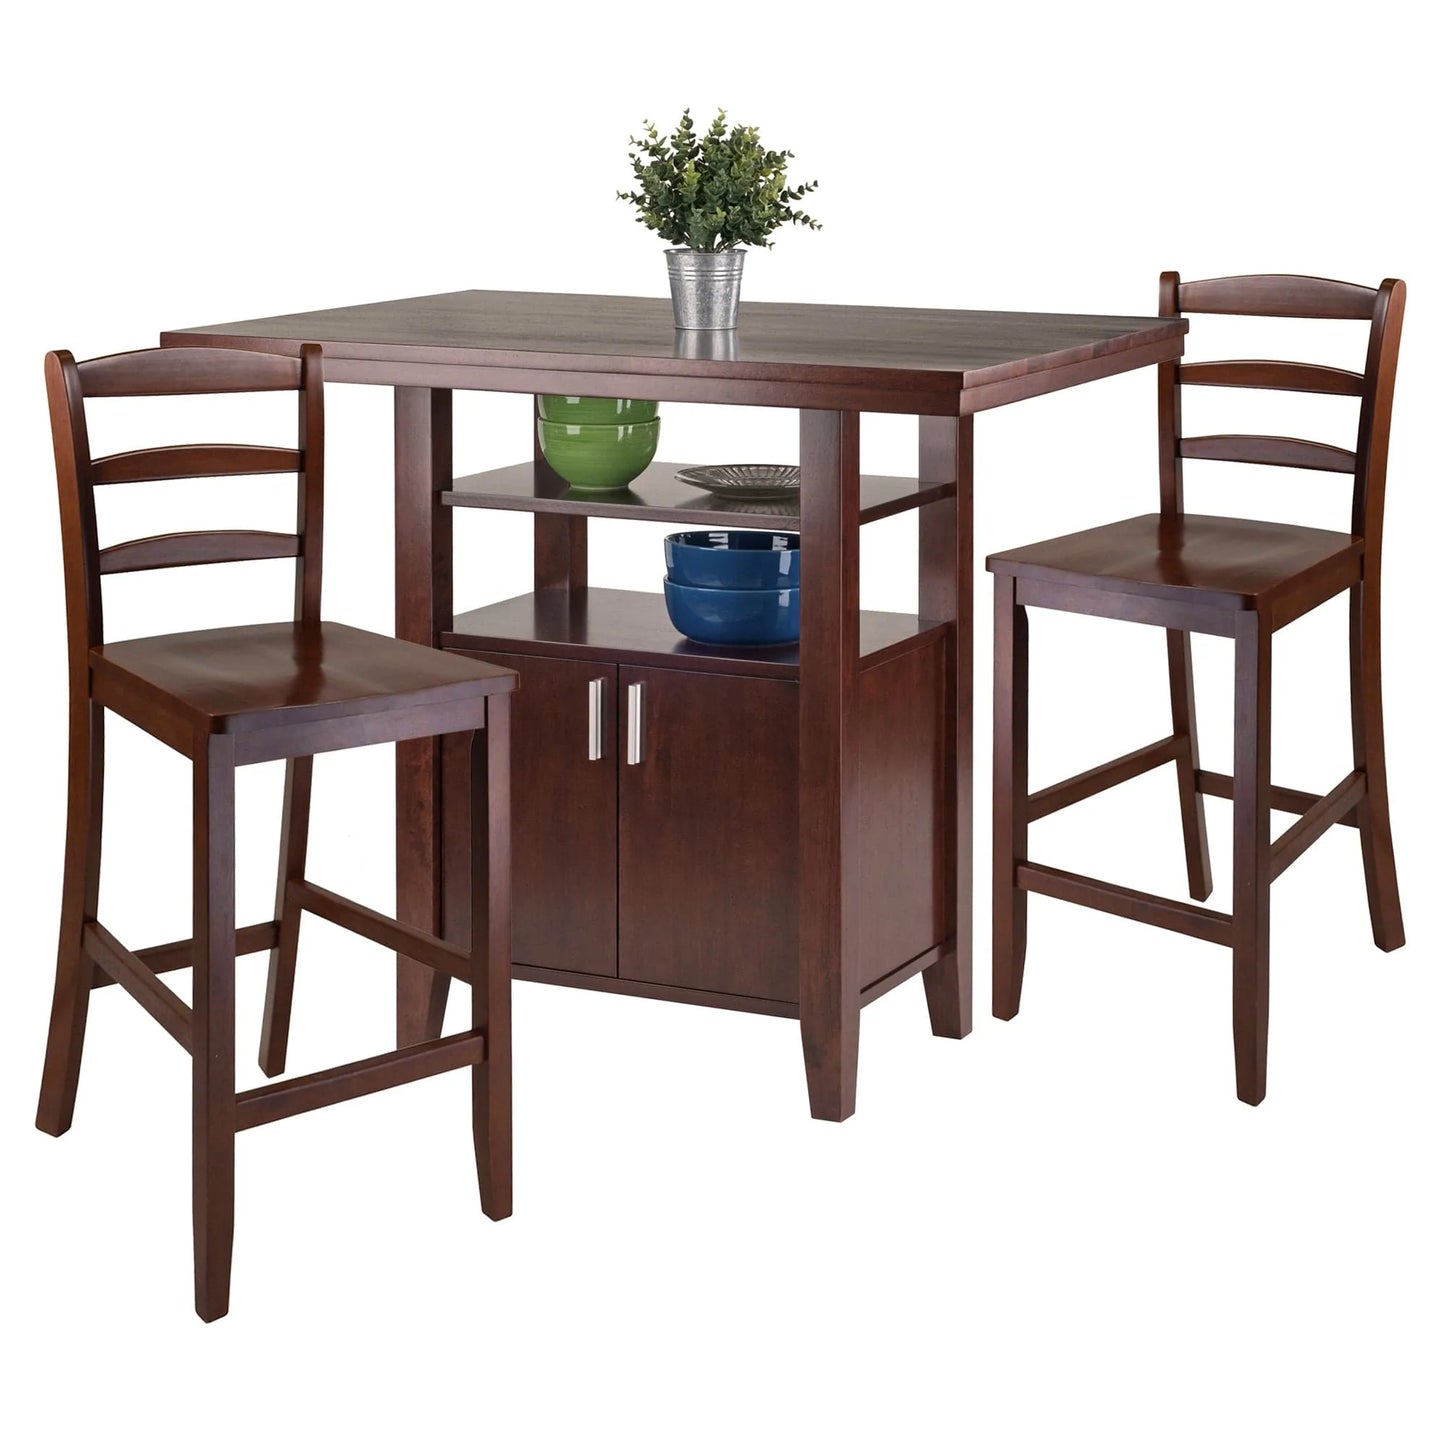 WINSOME Pub Table Set Albany 3-Pc High Table with Ladder-back Counter Stools, Walnut